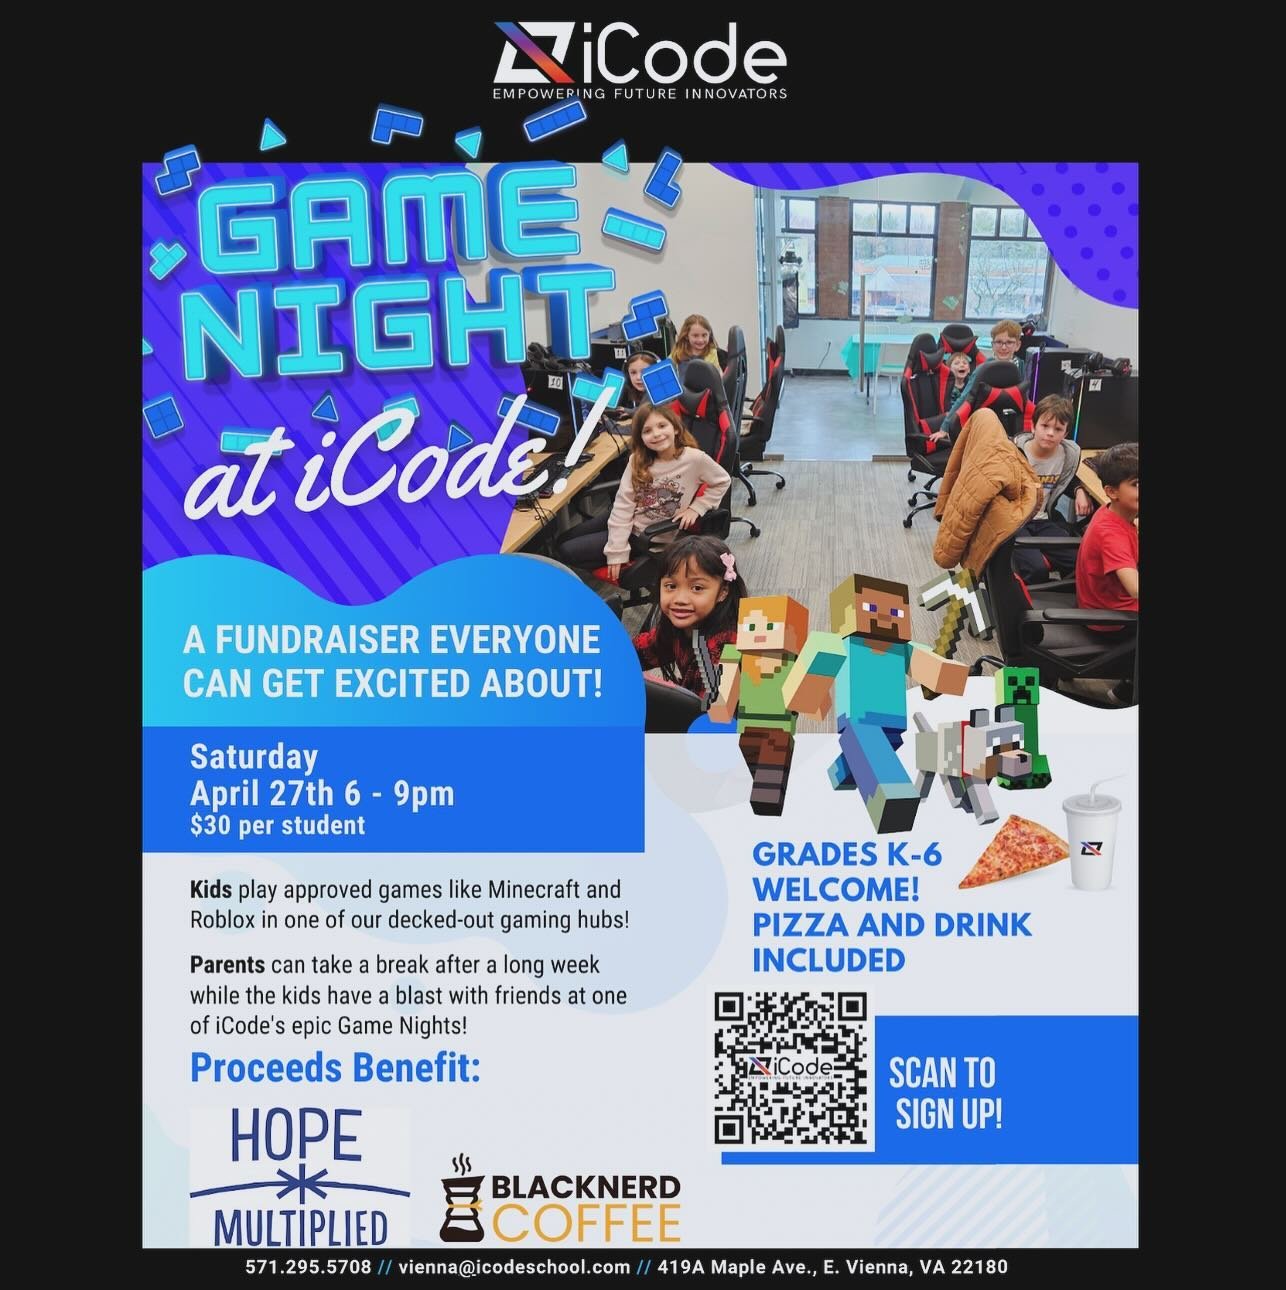 We&rsquo;re so excited that @blacknerdcoffee is teaming up with iCode to host a fundraiser on April 27th! They are generously donating part of the proceeds raised to our programs here at HopeMultiplied. Scan the QR code to register and PM us if you n